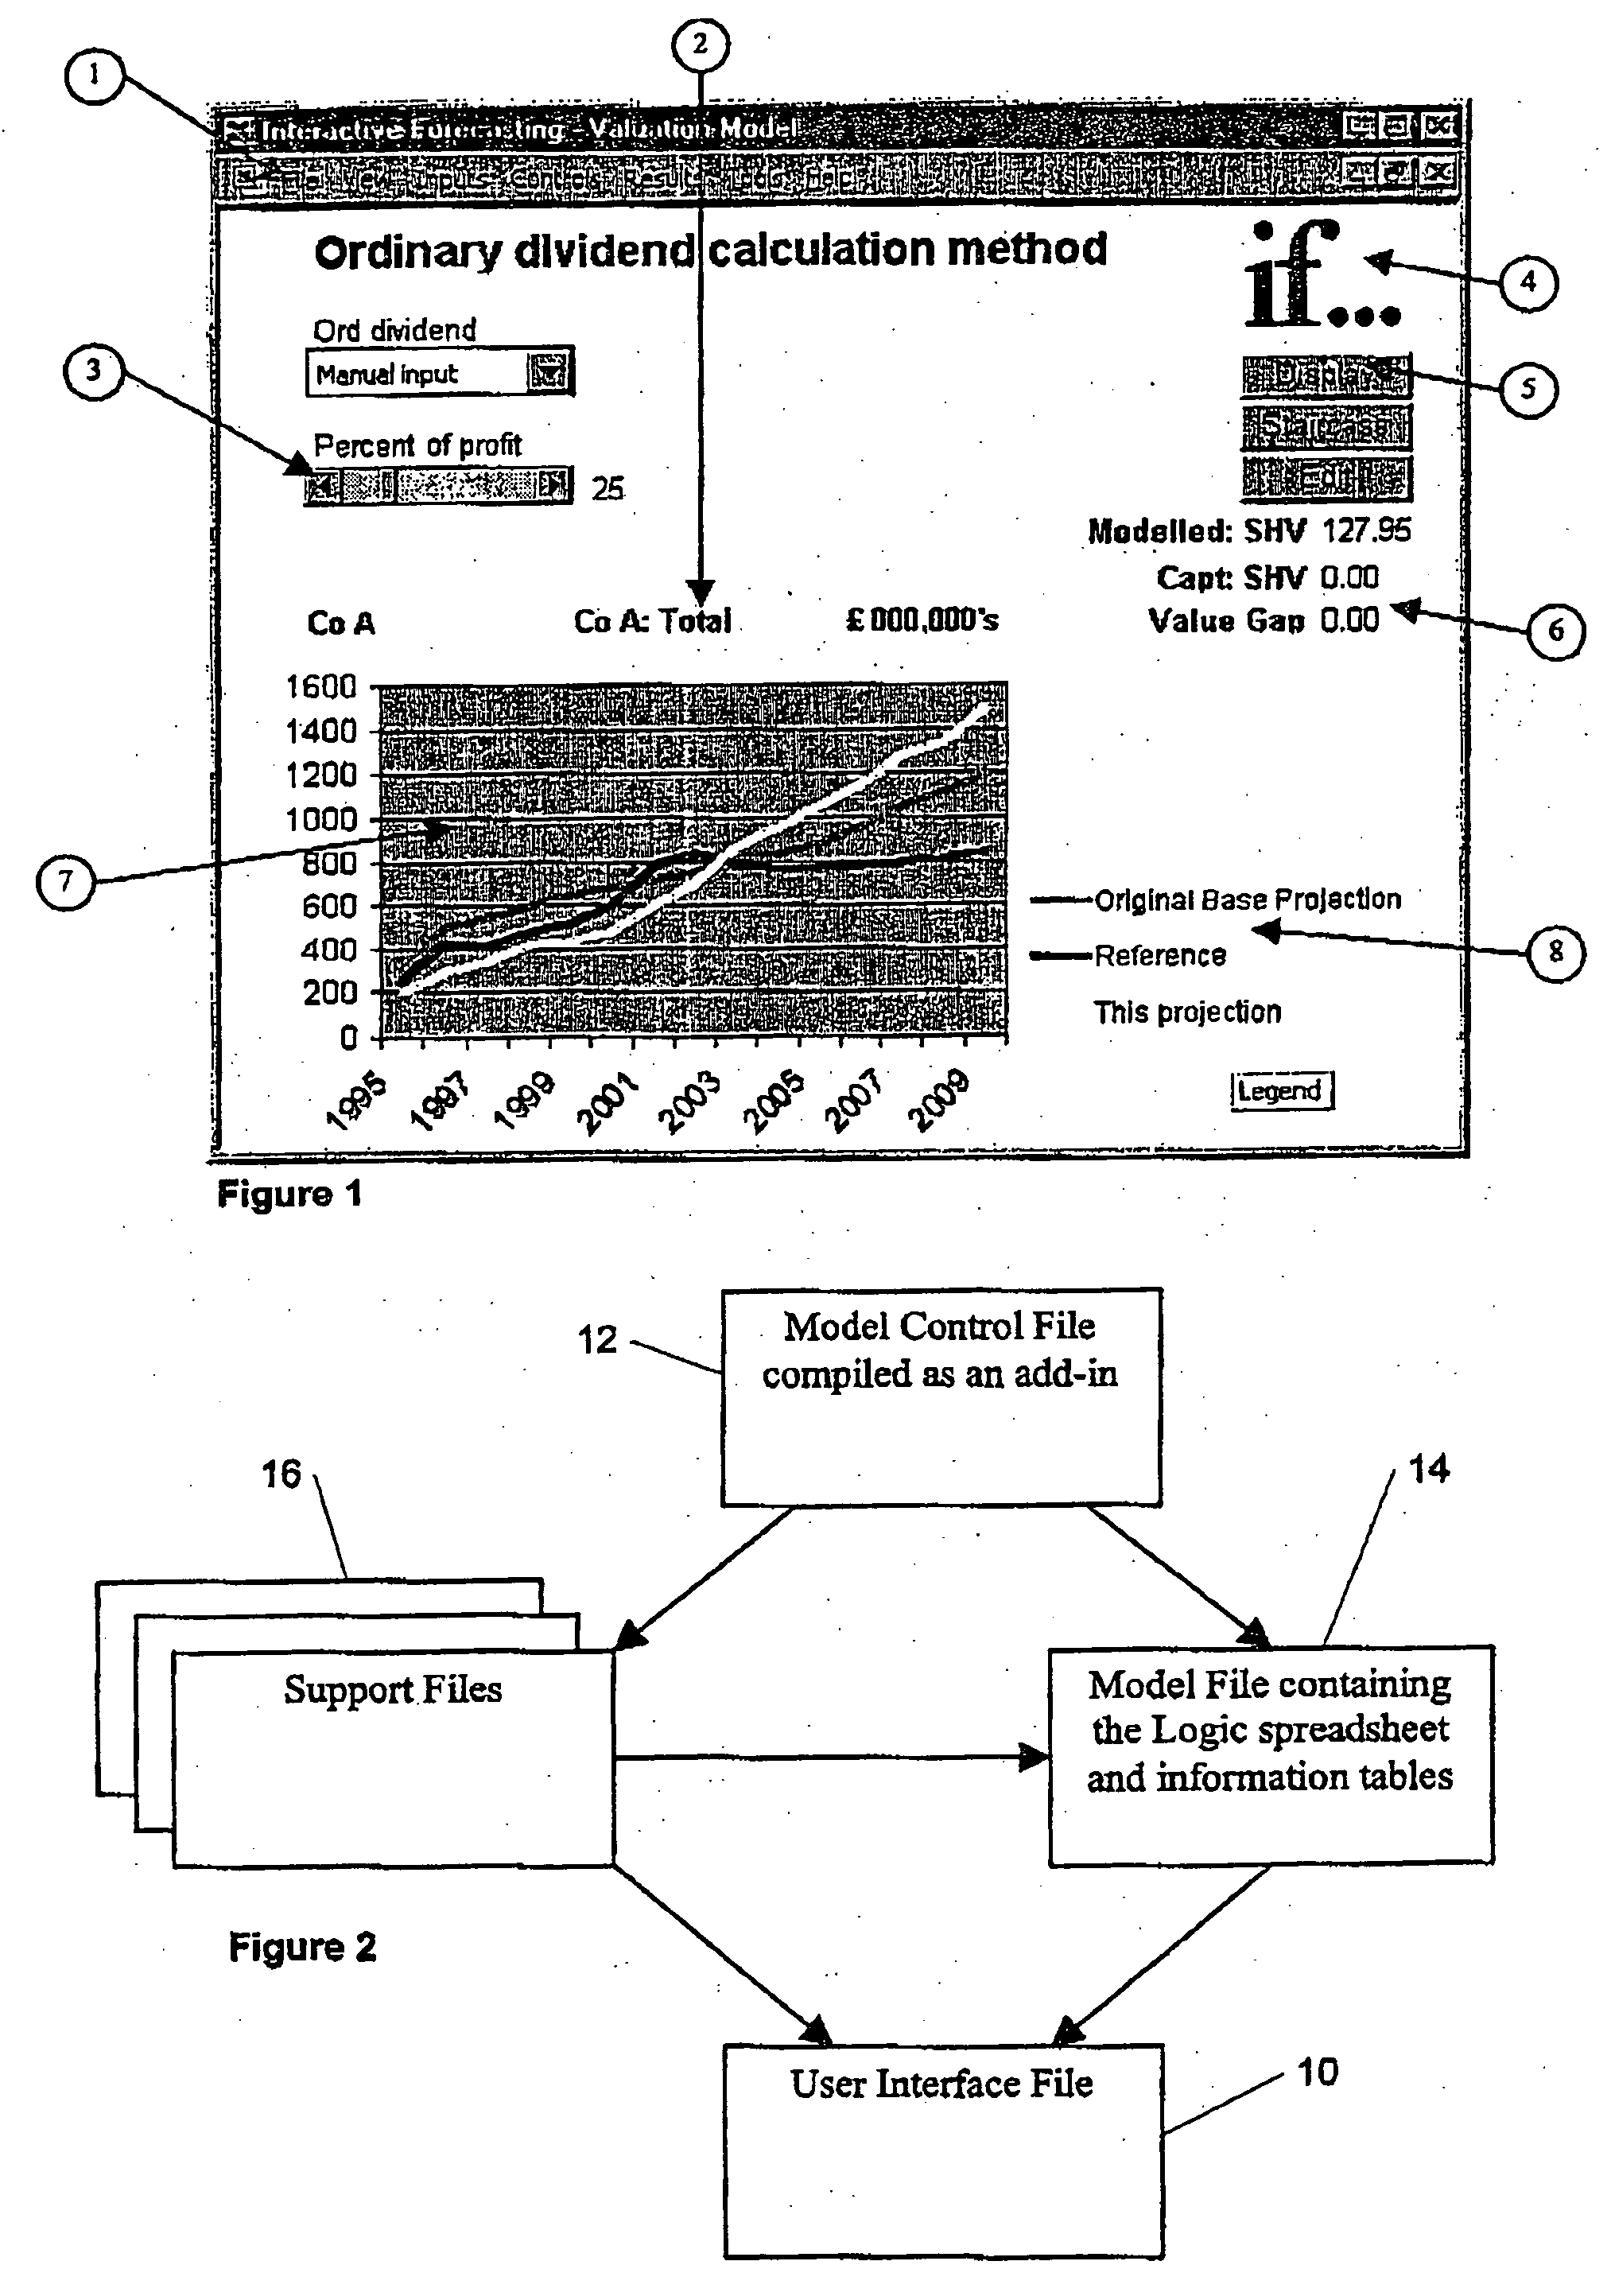 Method and apparatus for automatically producing spreadsheet-based models